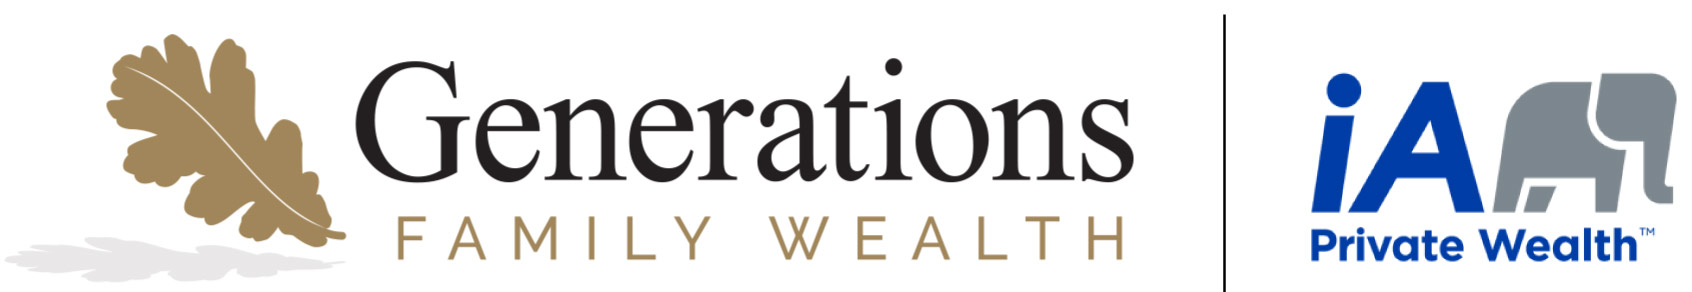 Generations Family Wealth